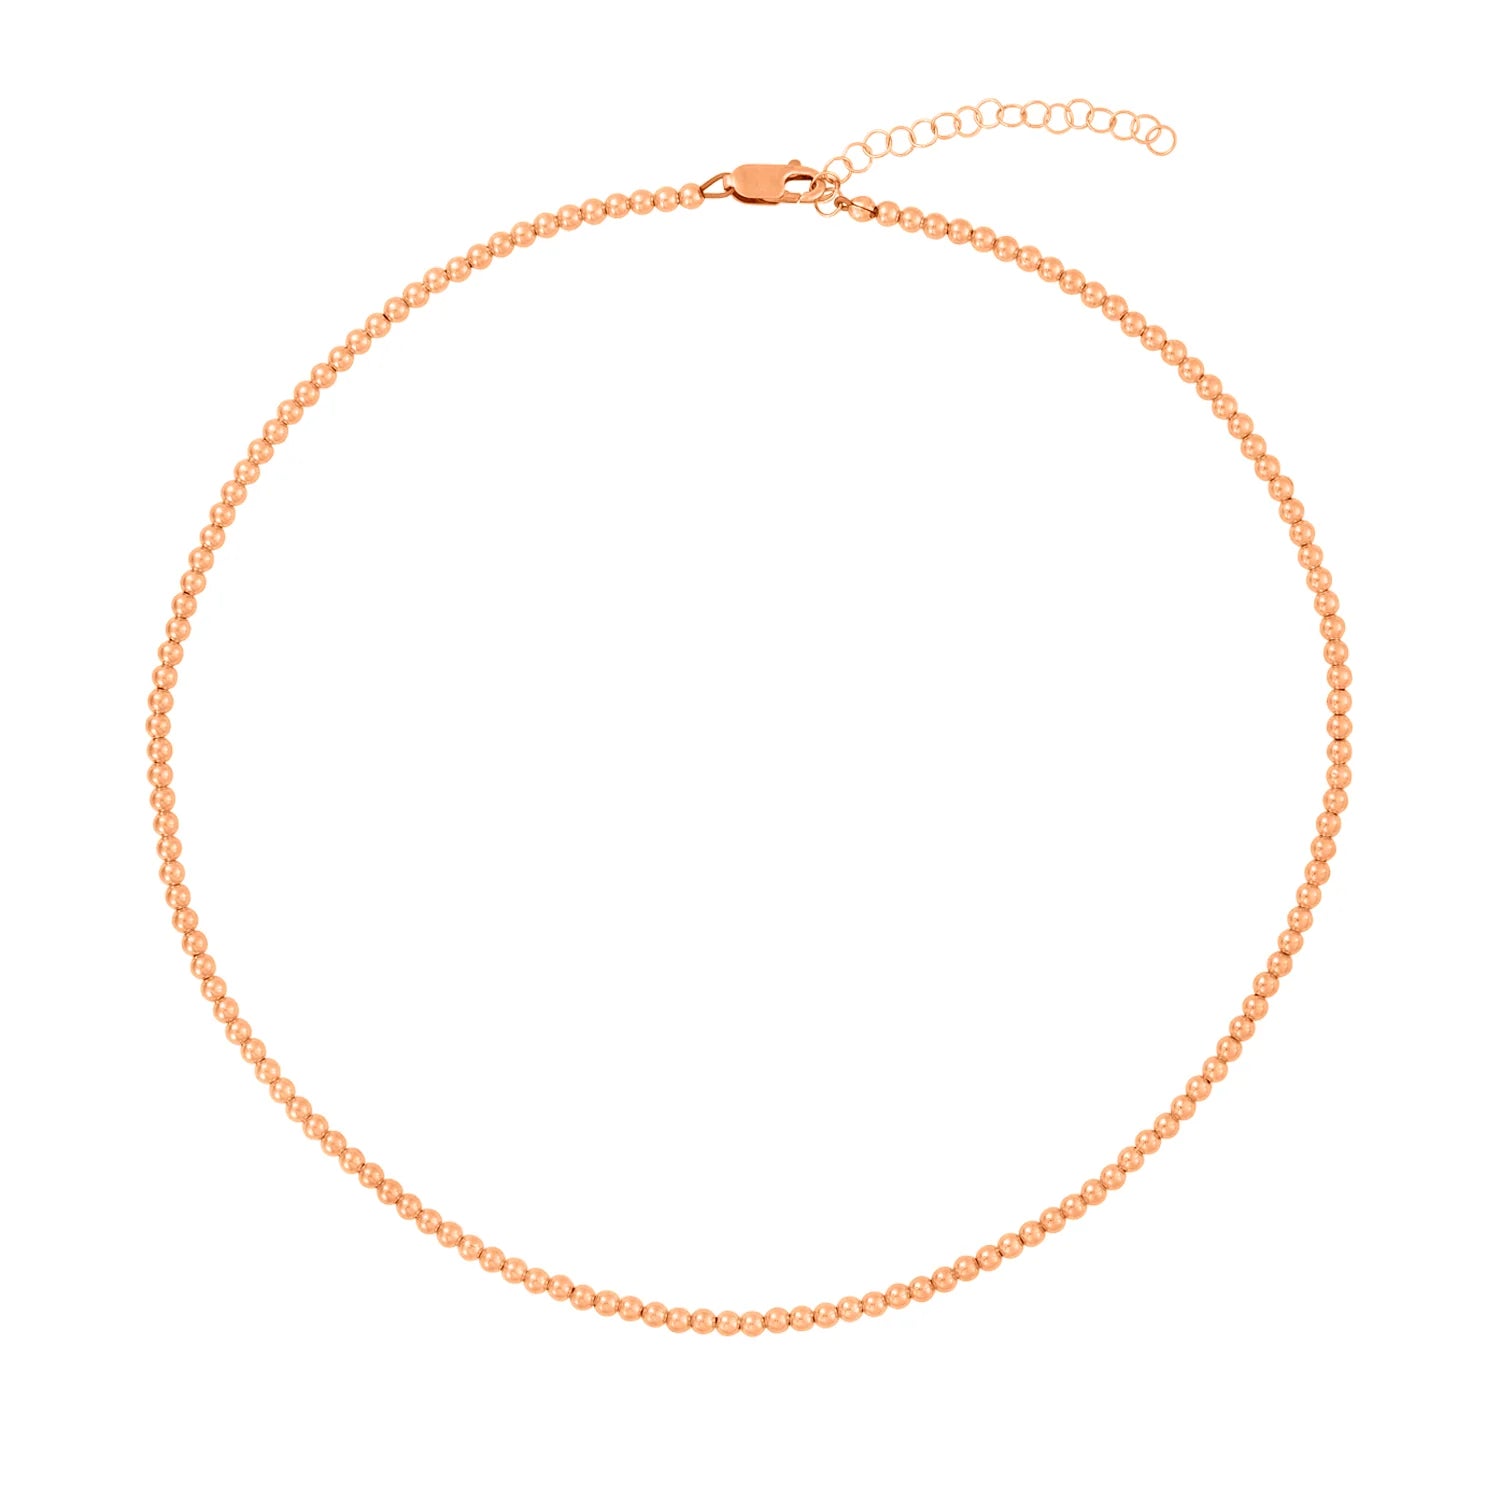 3MM SIGNATURE ROSE GOLD BEADED NECKLACE